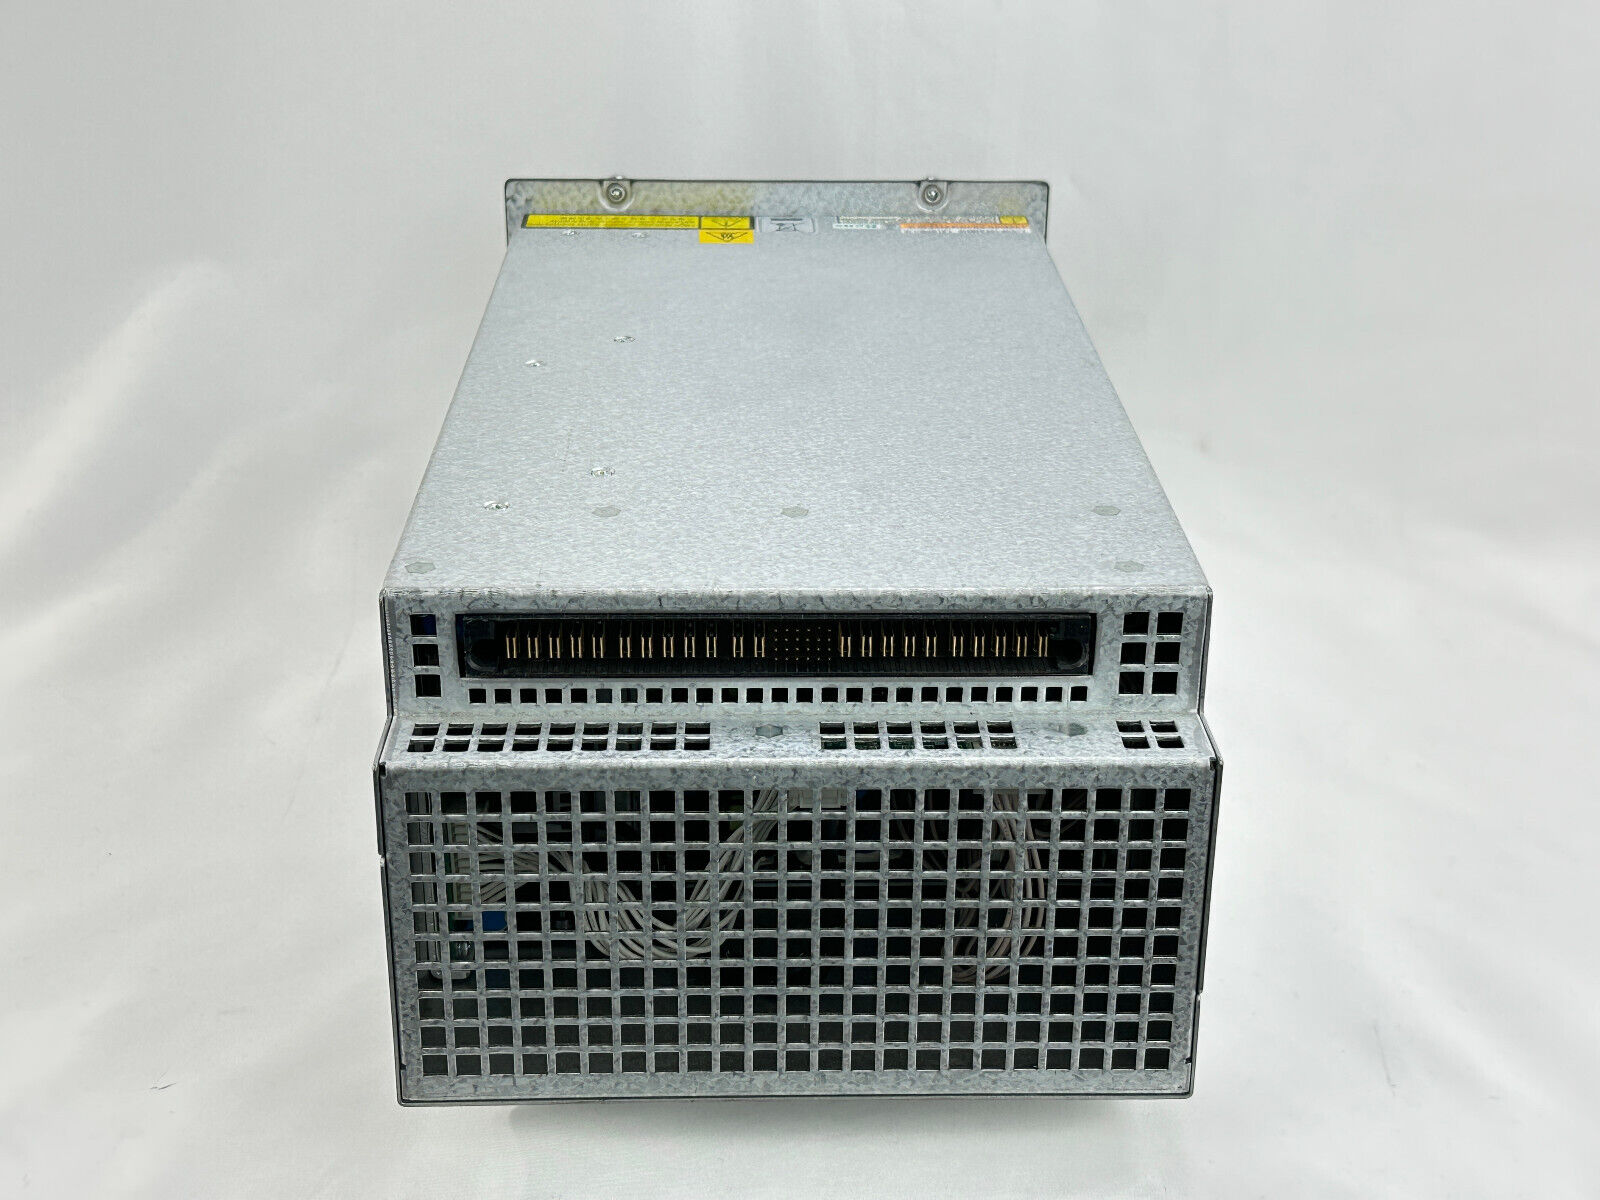 JD227A 6000W Switching Power Supply Unit for HPE FlexNetwork 7500 H3C S7500E PoE.